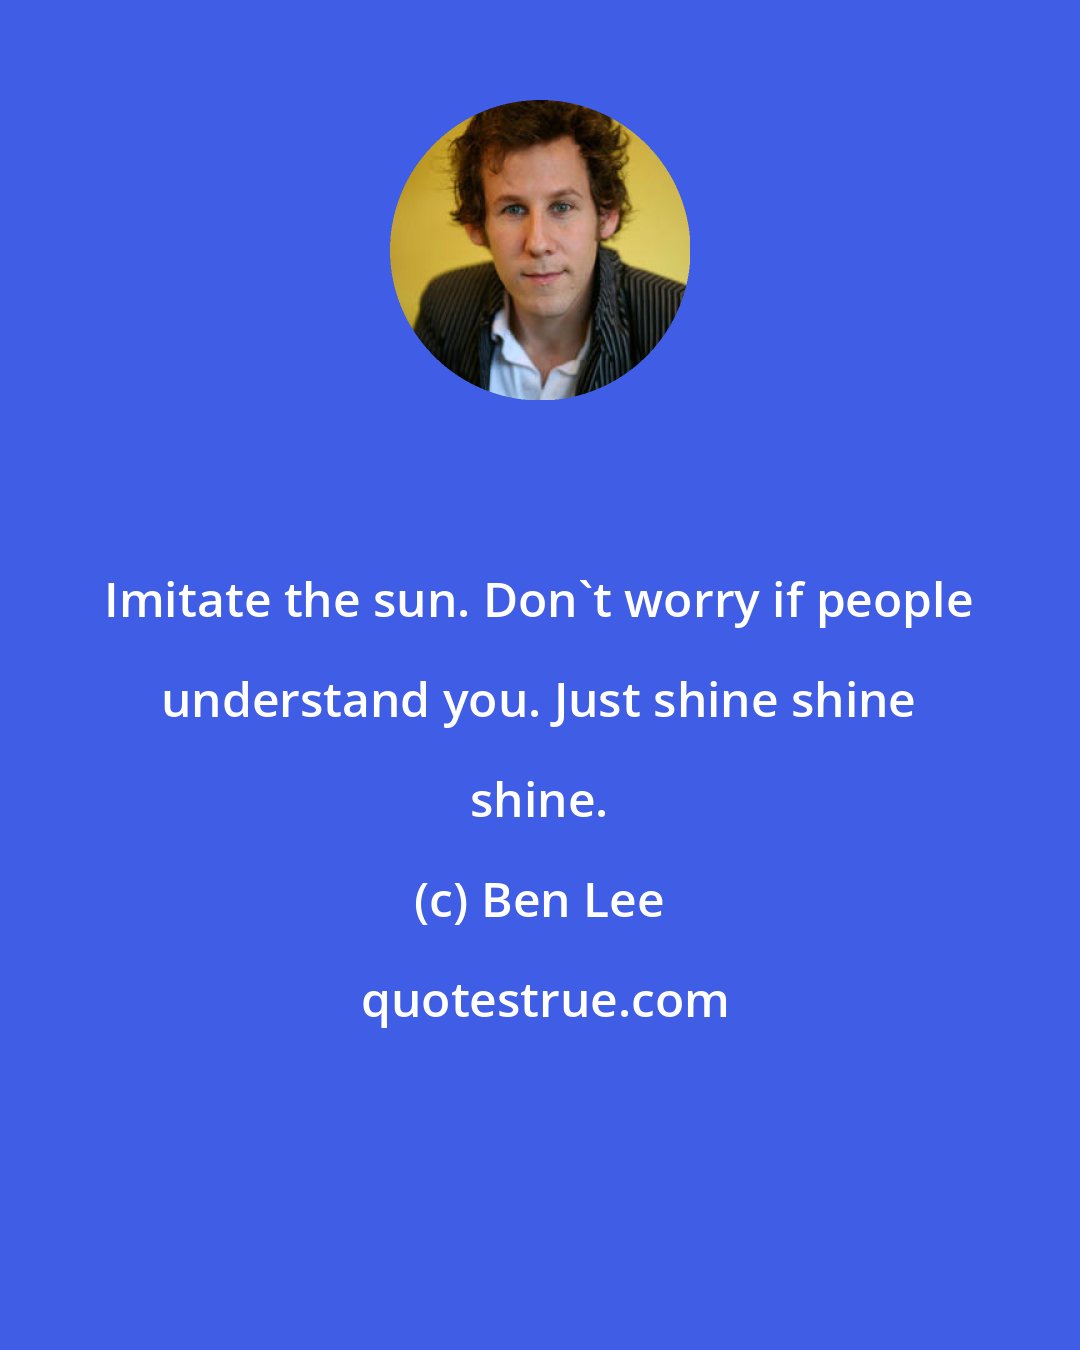 Ben Lee: Imitate the sun. Don't worry if people understand you. Just shine shine shine.